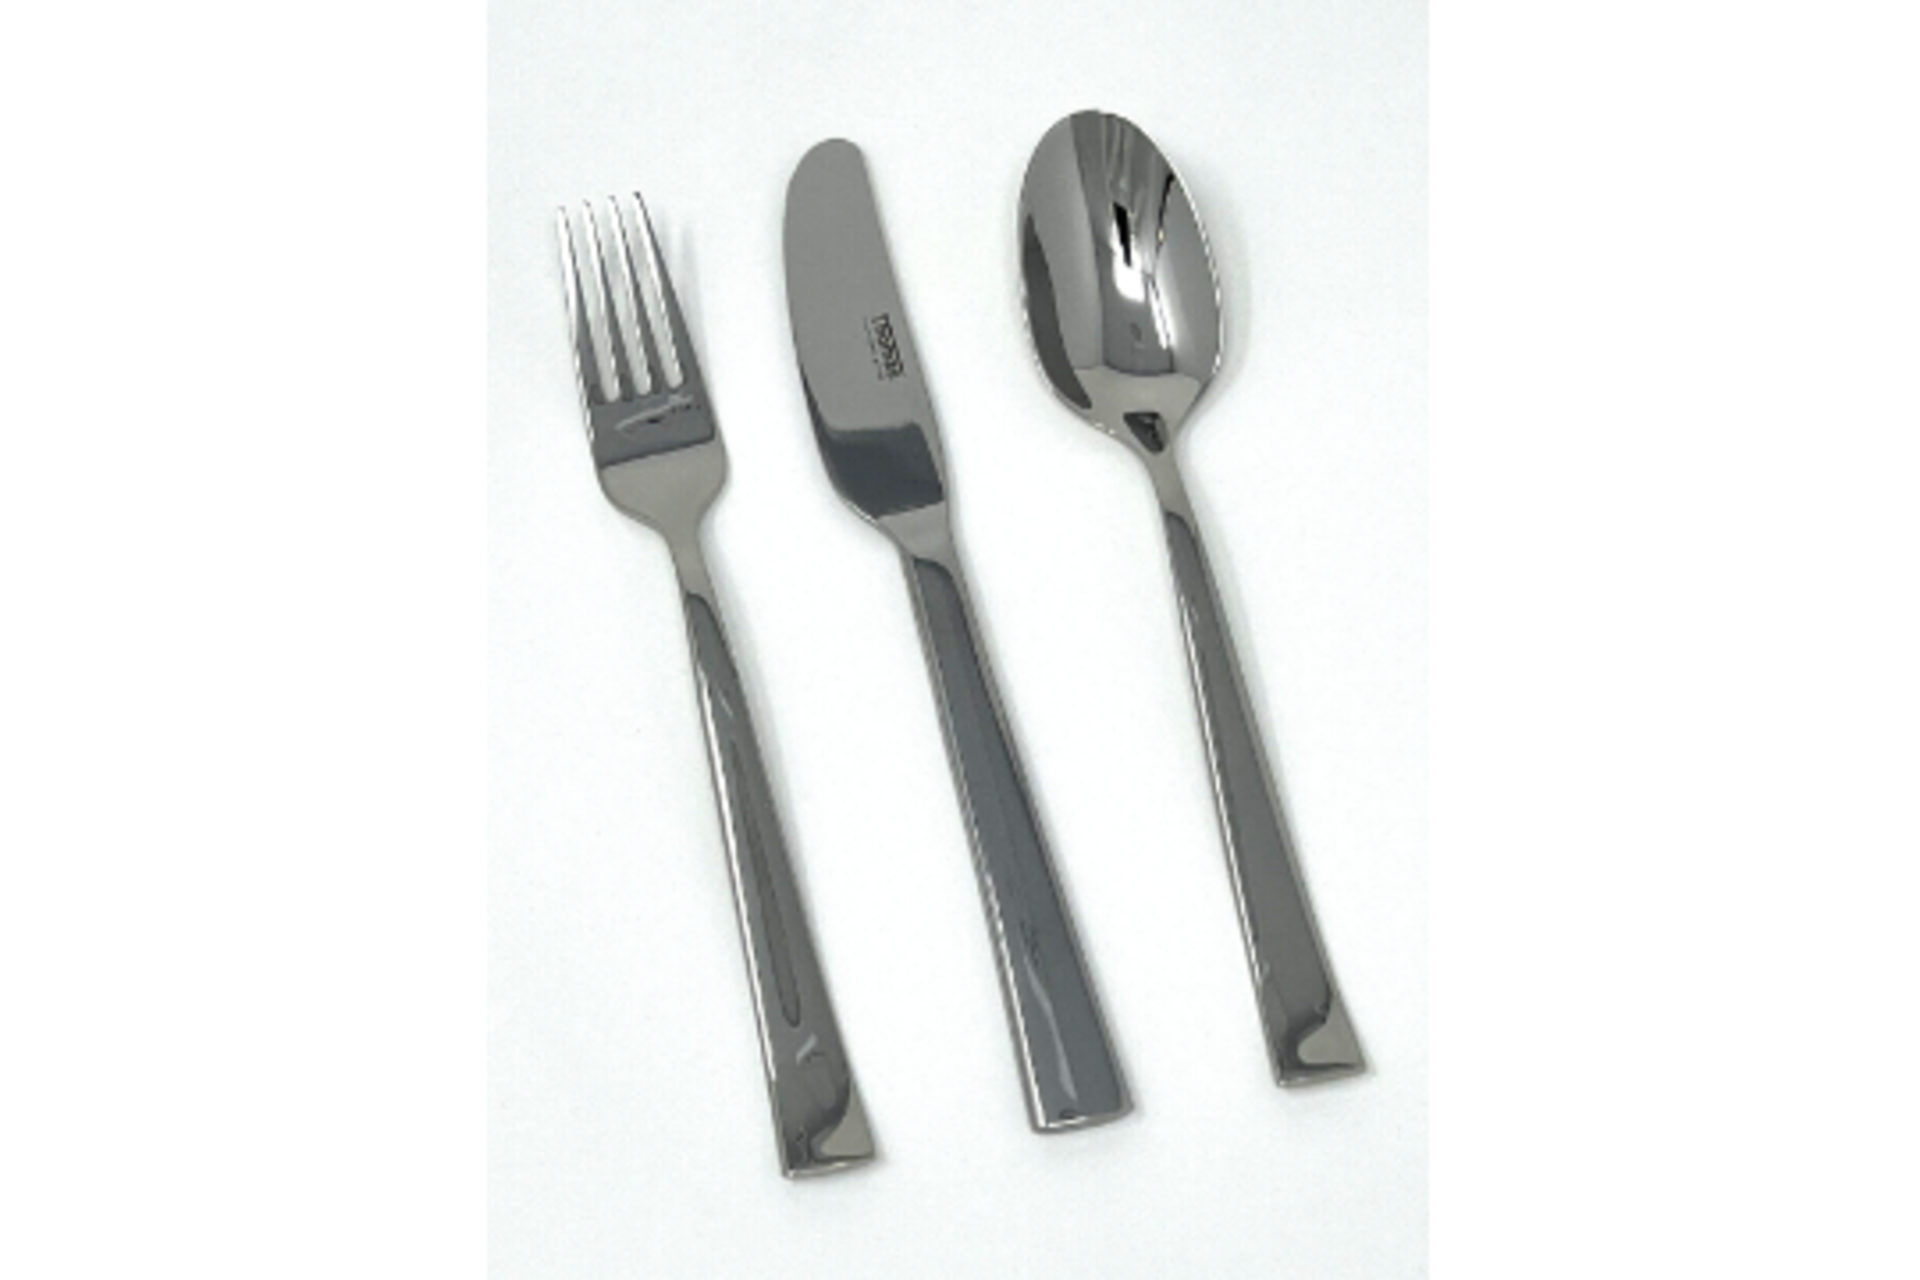 48 x New Boxed Sets of 3 Thomas Children’s Cutlery Set Stainless Steel Easy Grip Handle. RRP £24. - Image 3 of 8